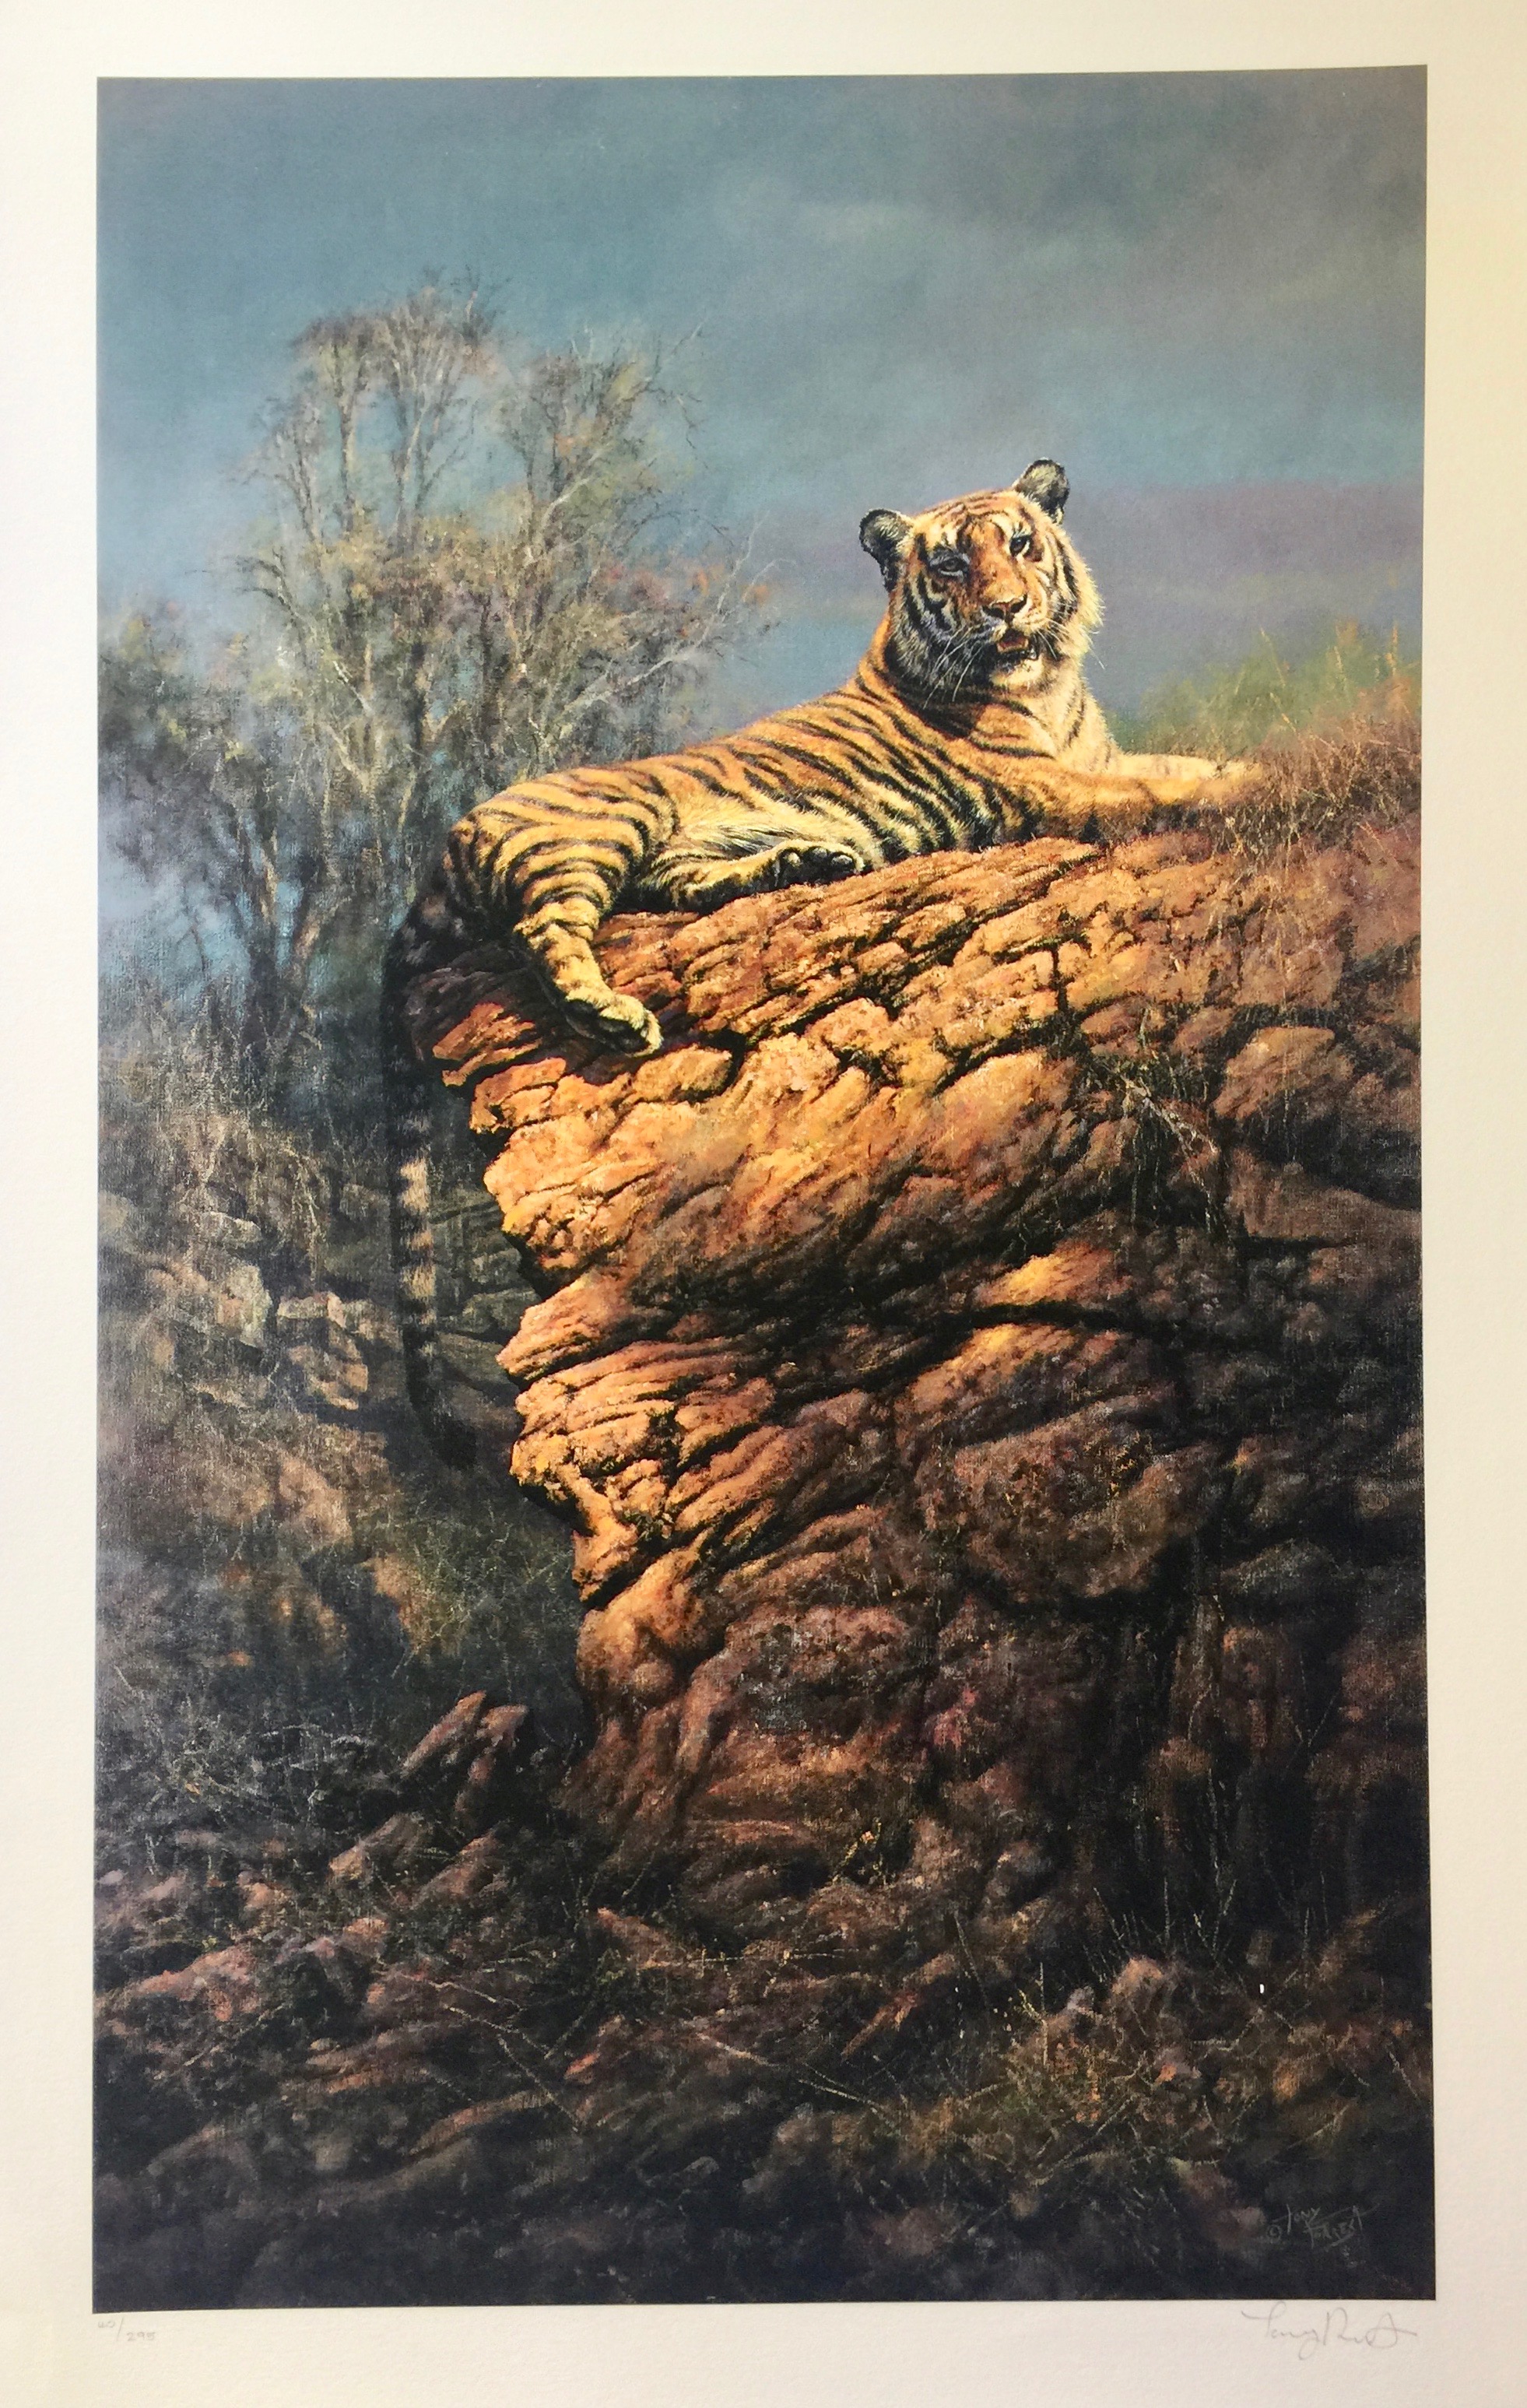 TONY FORREST "MAJESTIC POSE" Hand Signed Limited Edition Giclee TIGER ART